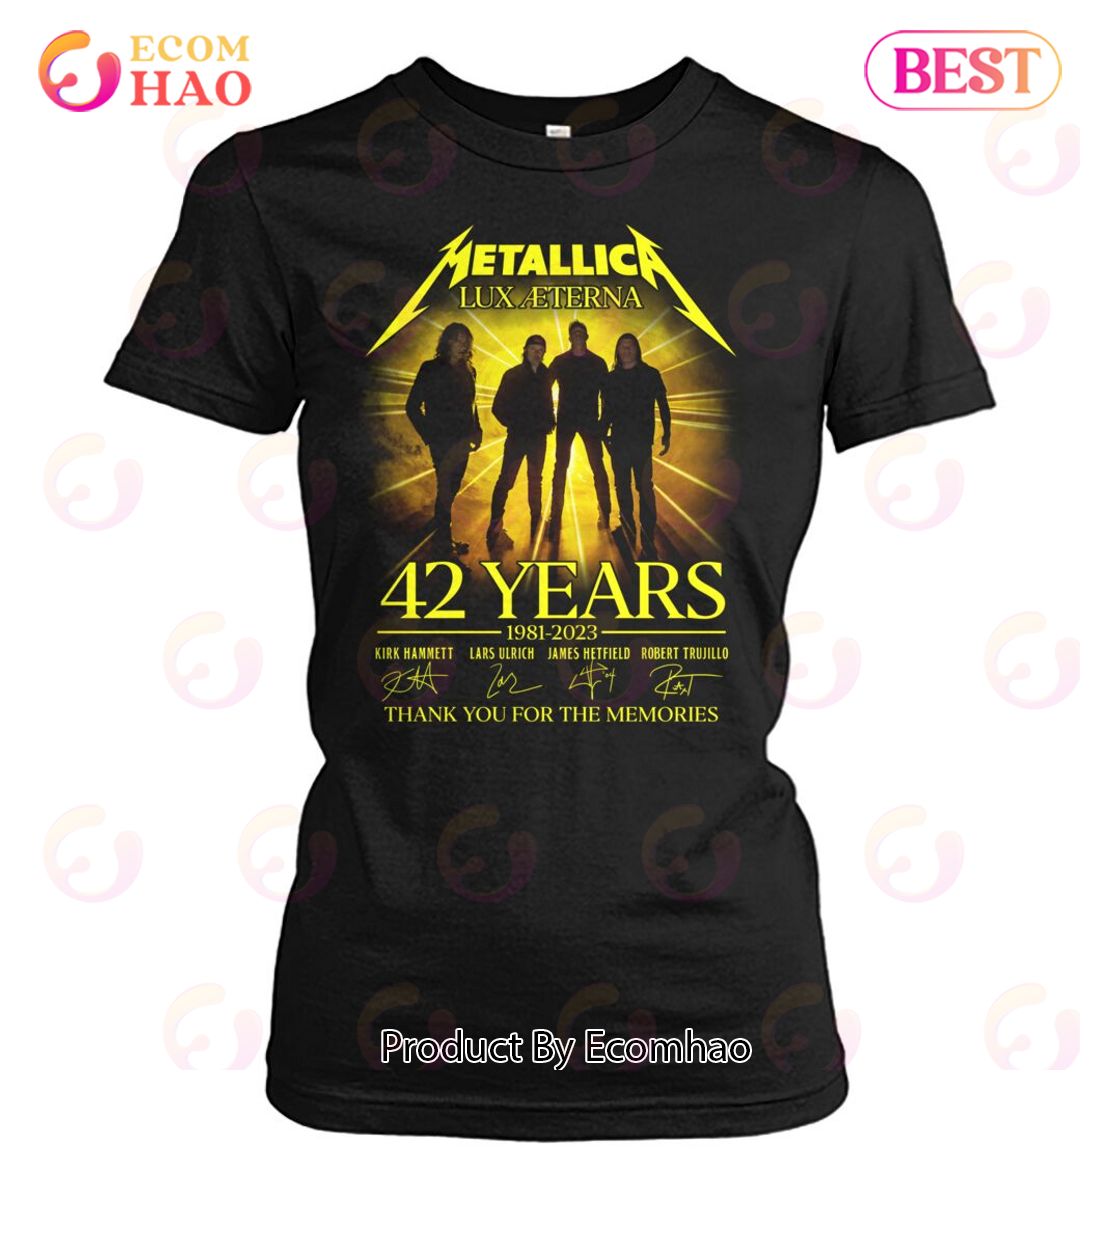 Metallica Lux Aeterna 42 Years 1981 - 2023 Thank You For The Memories T ...